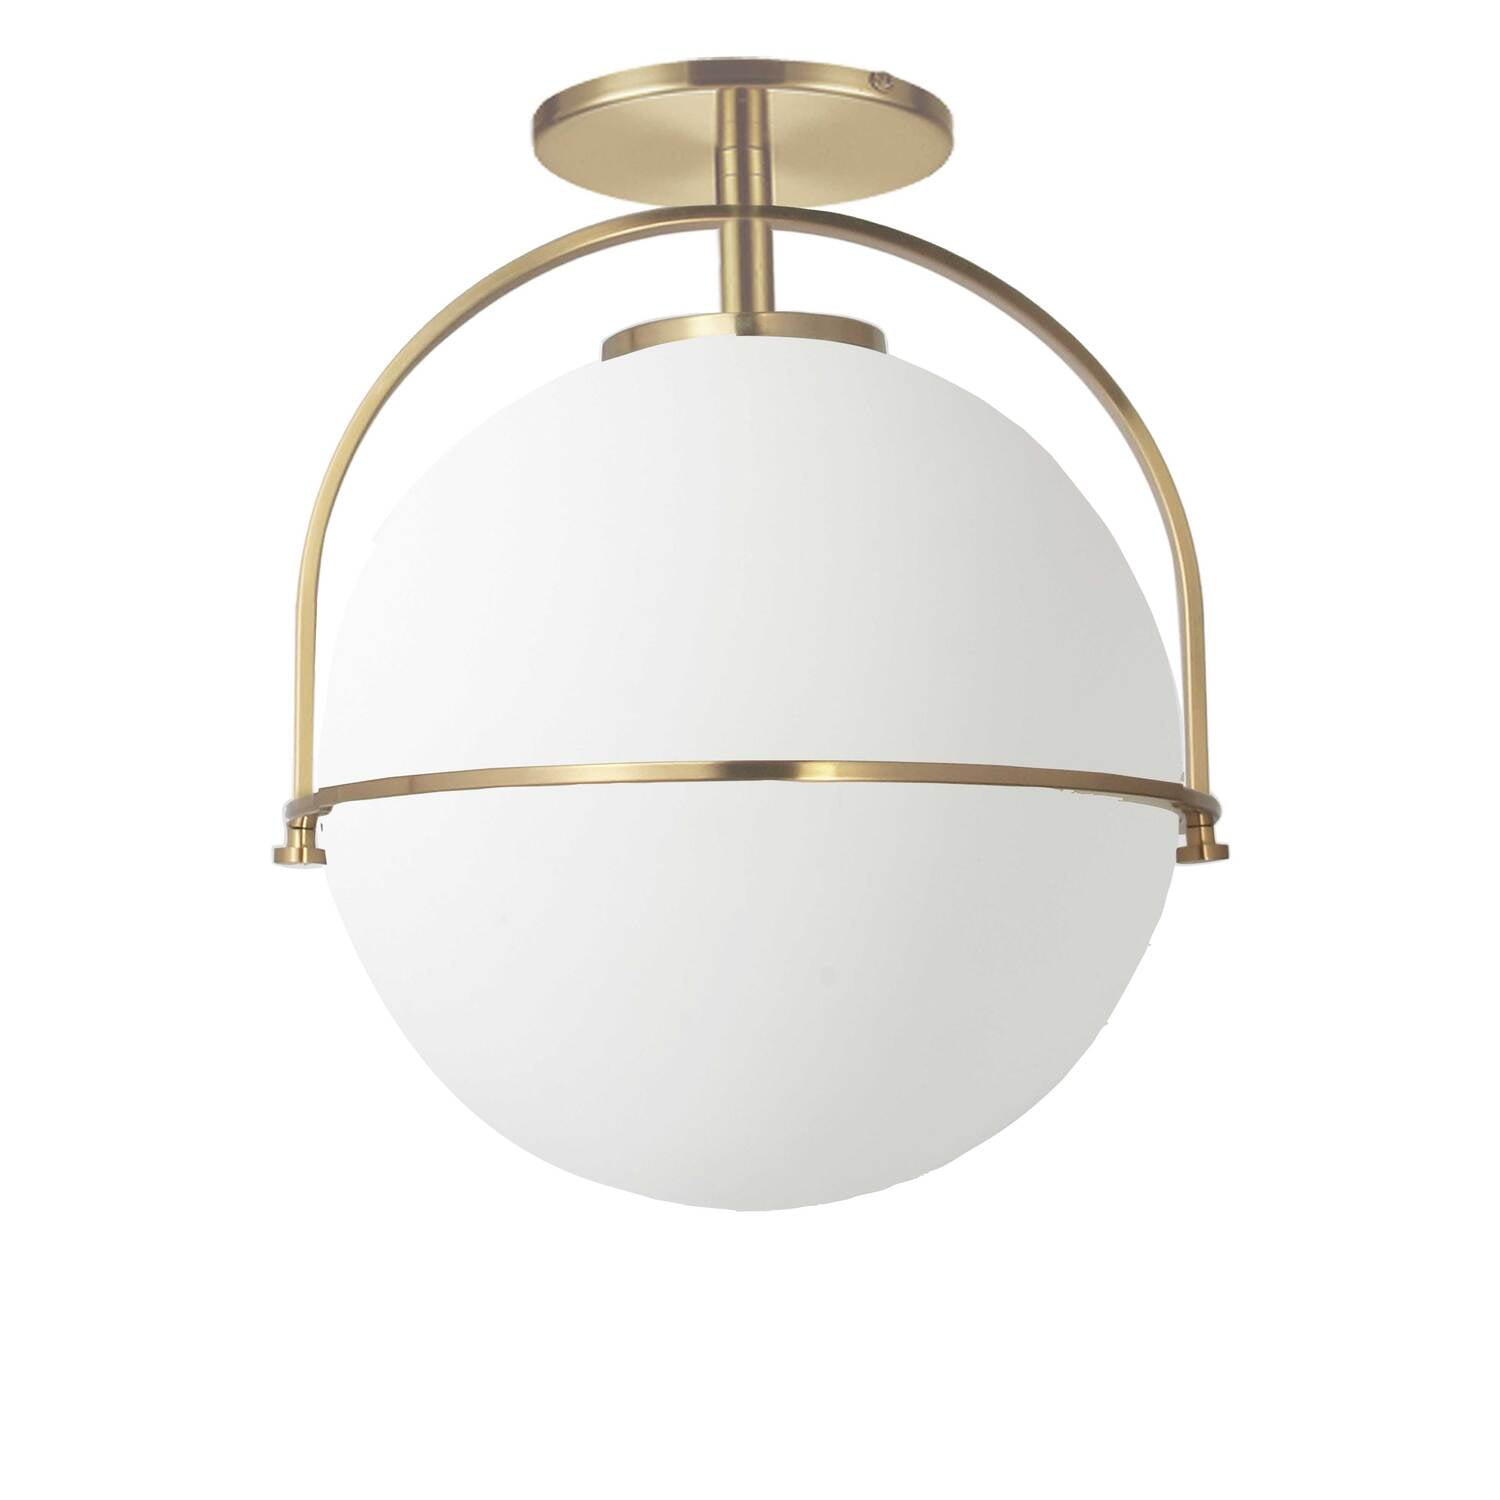 Picture of Dainolite PAO-121SF-AGB 1 Light Incandescent Semi-Flush Mount, Aged Brass with White Opal Glass